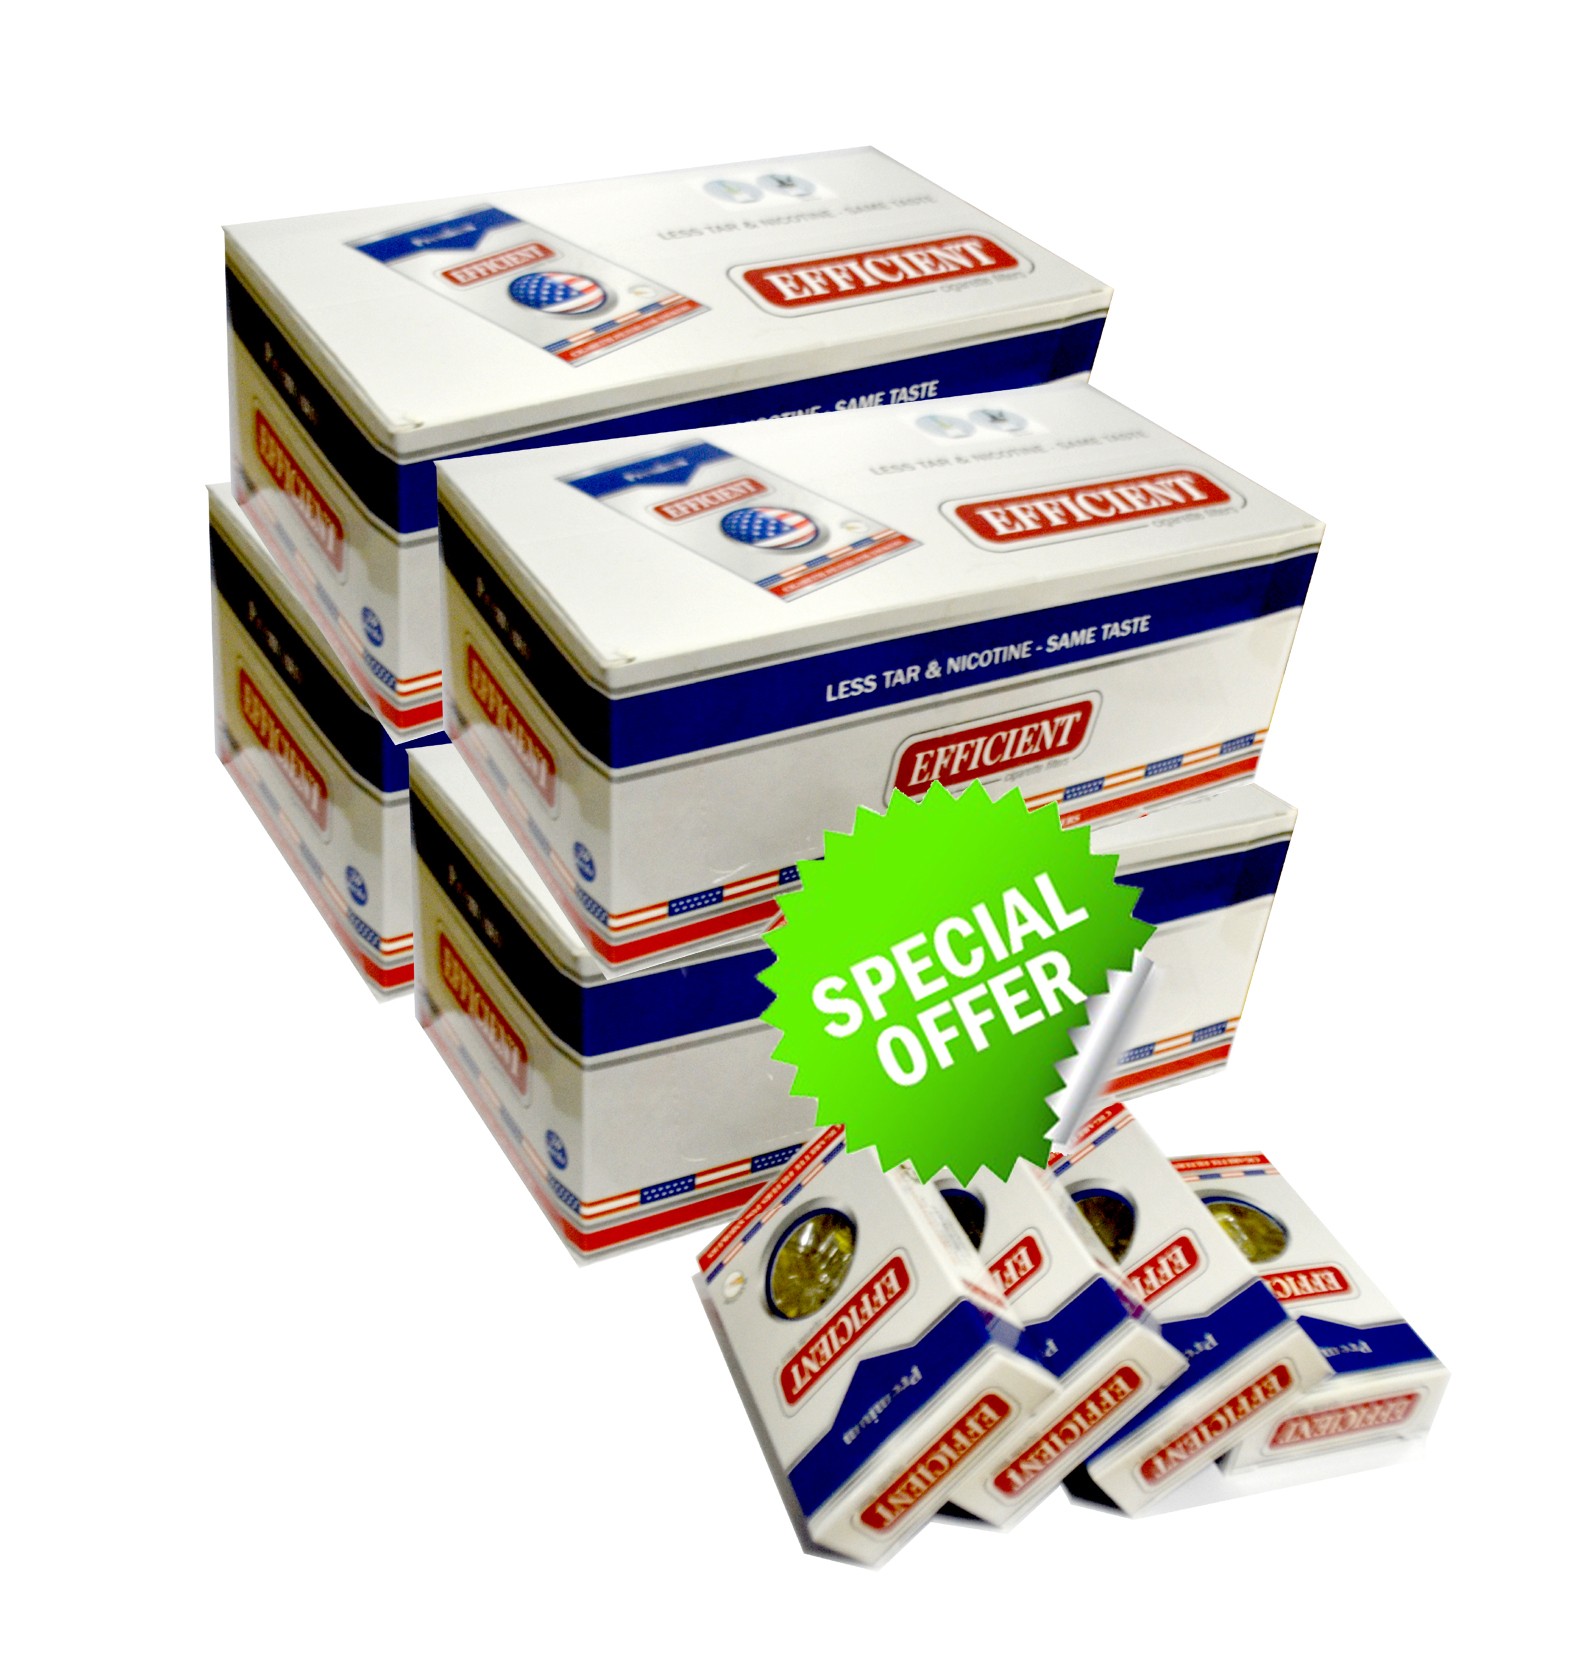 Efficient Cigarette Filters 80 packs Wholesale Special Offer (2400 filters)